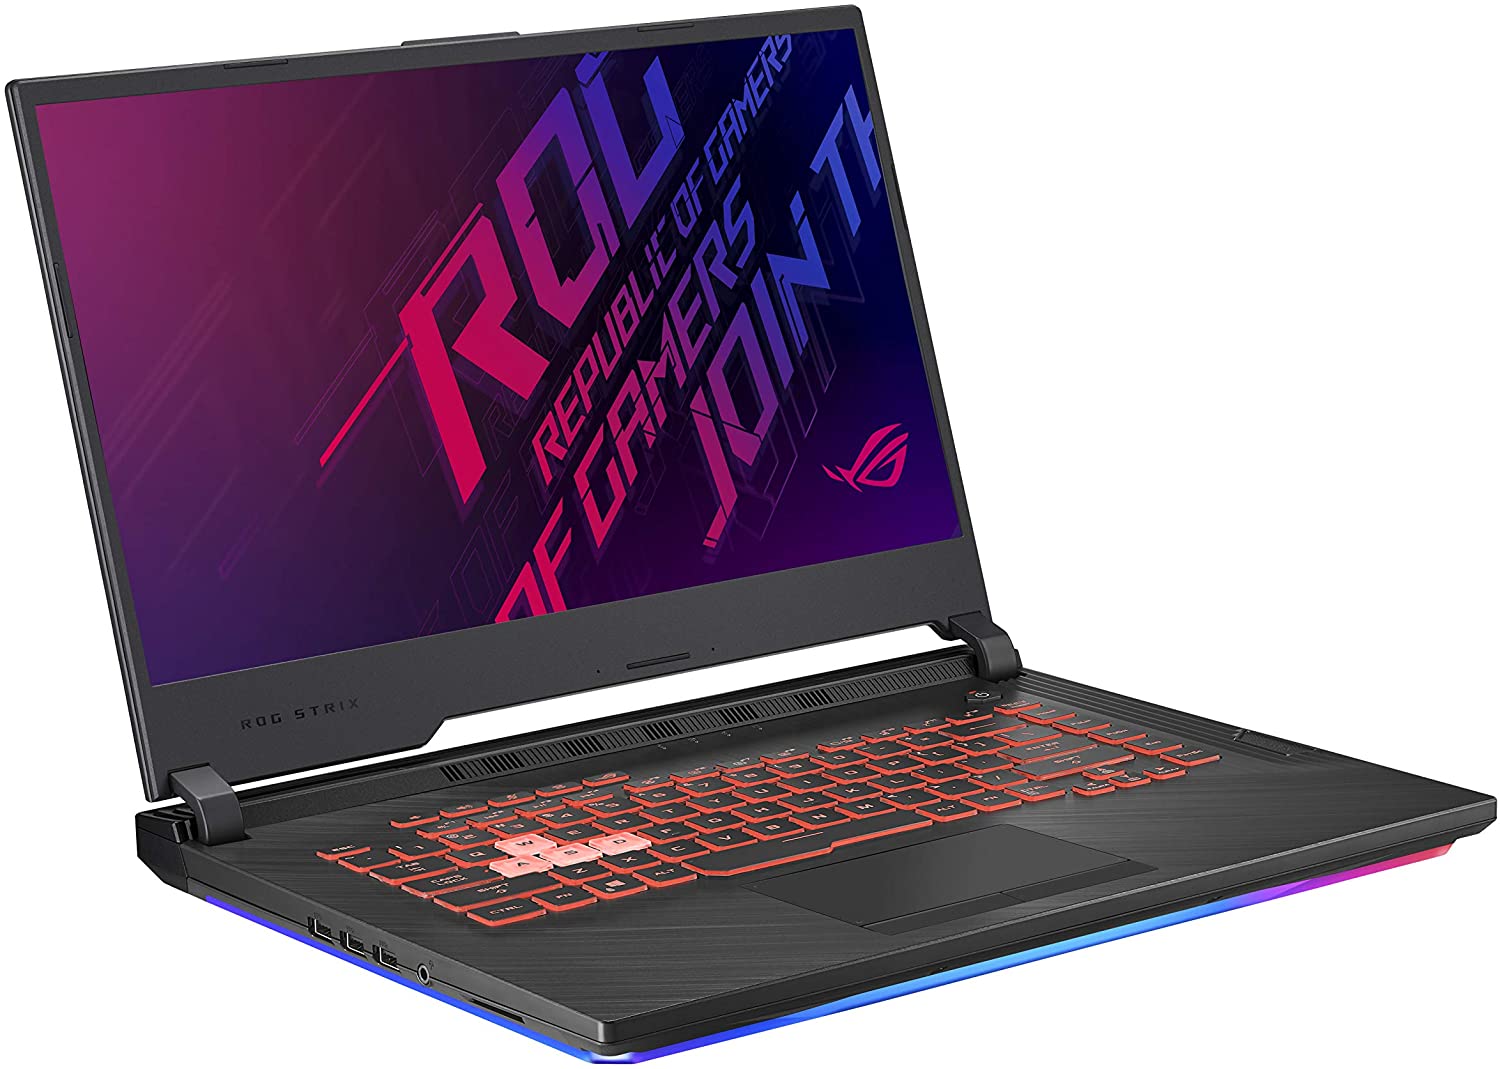 4 Critical Considerations When Purchasing a Gaming Laptop